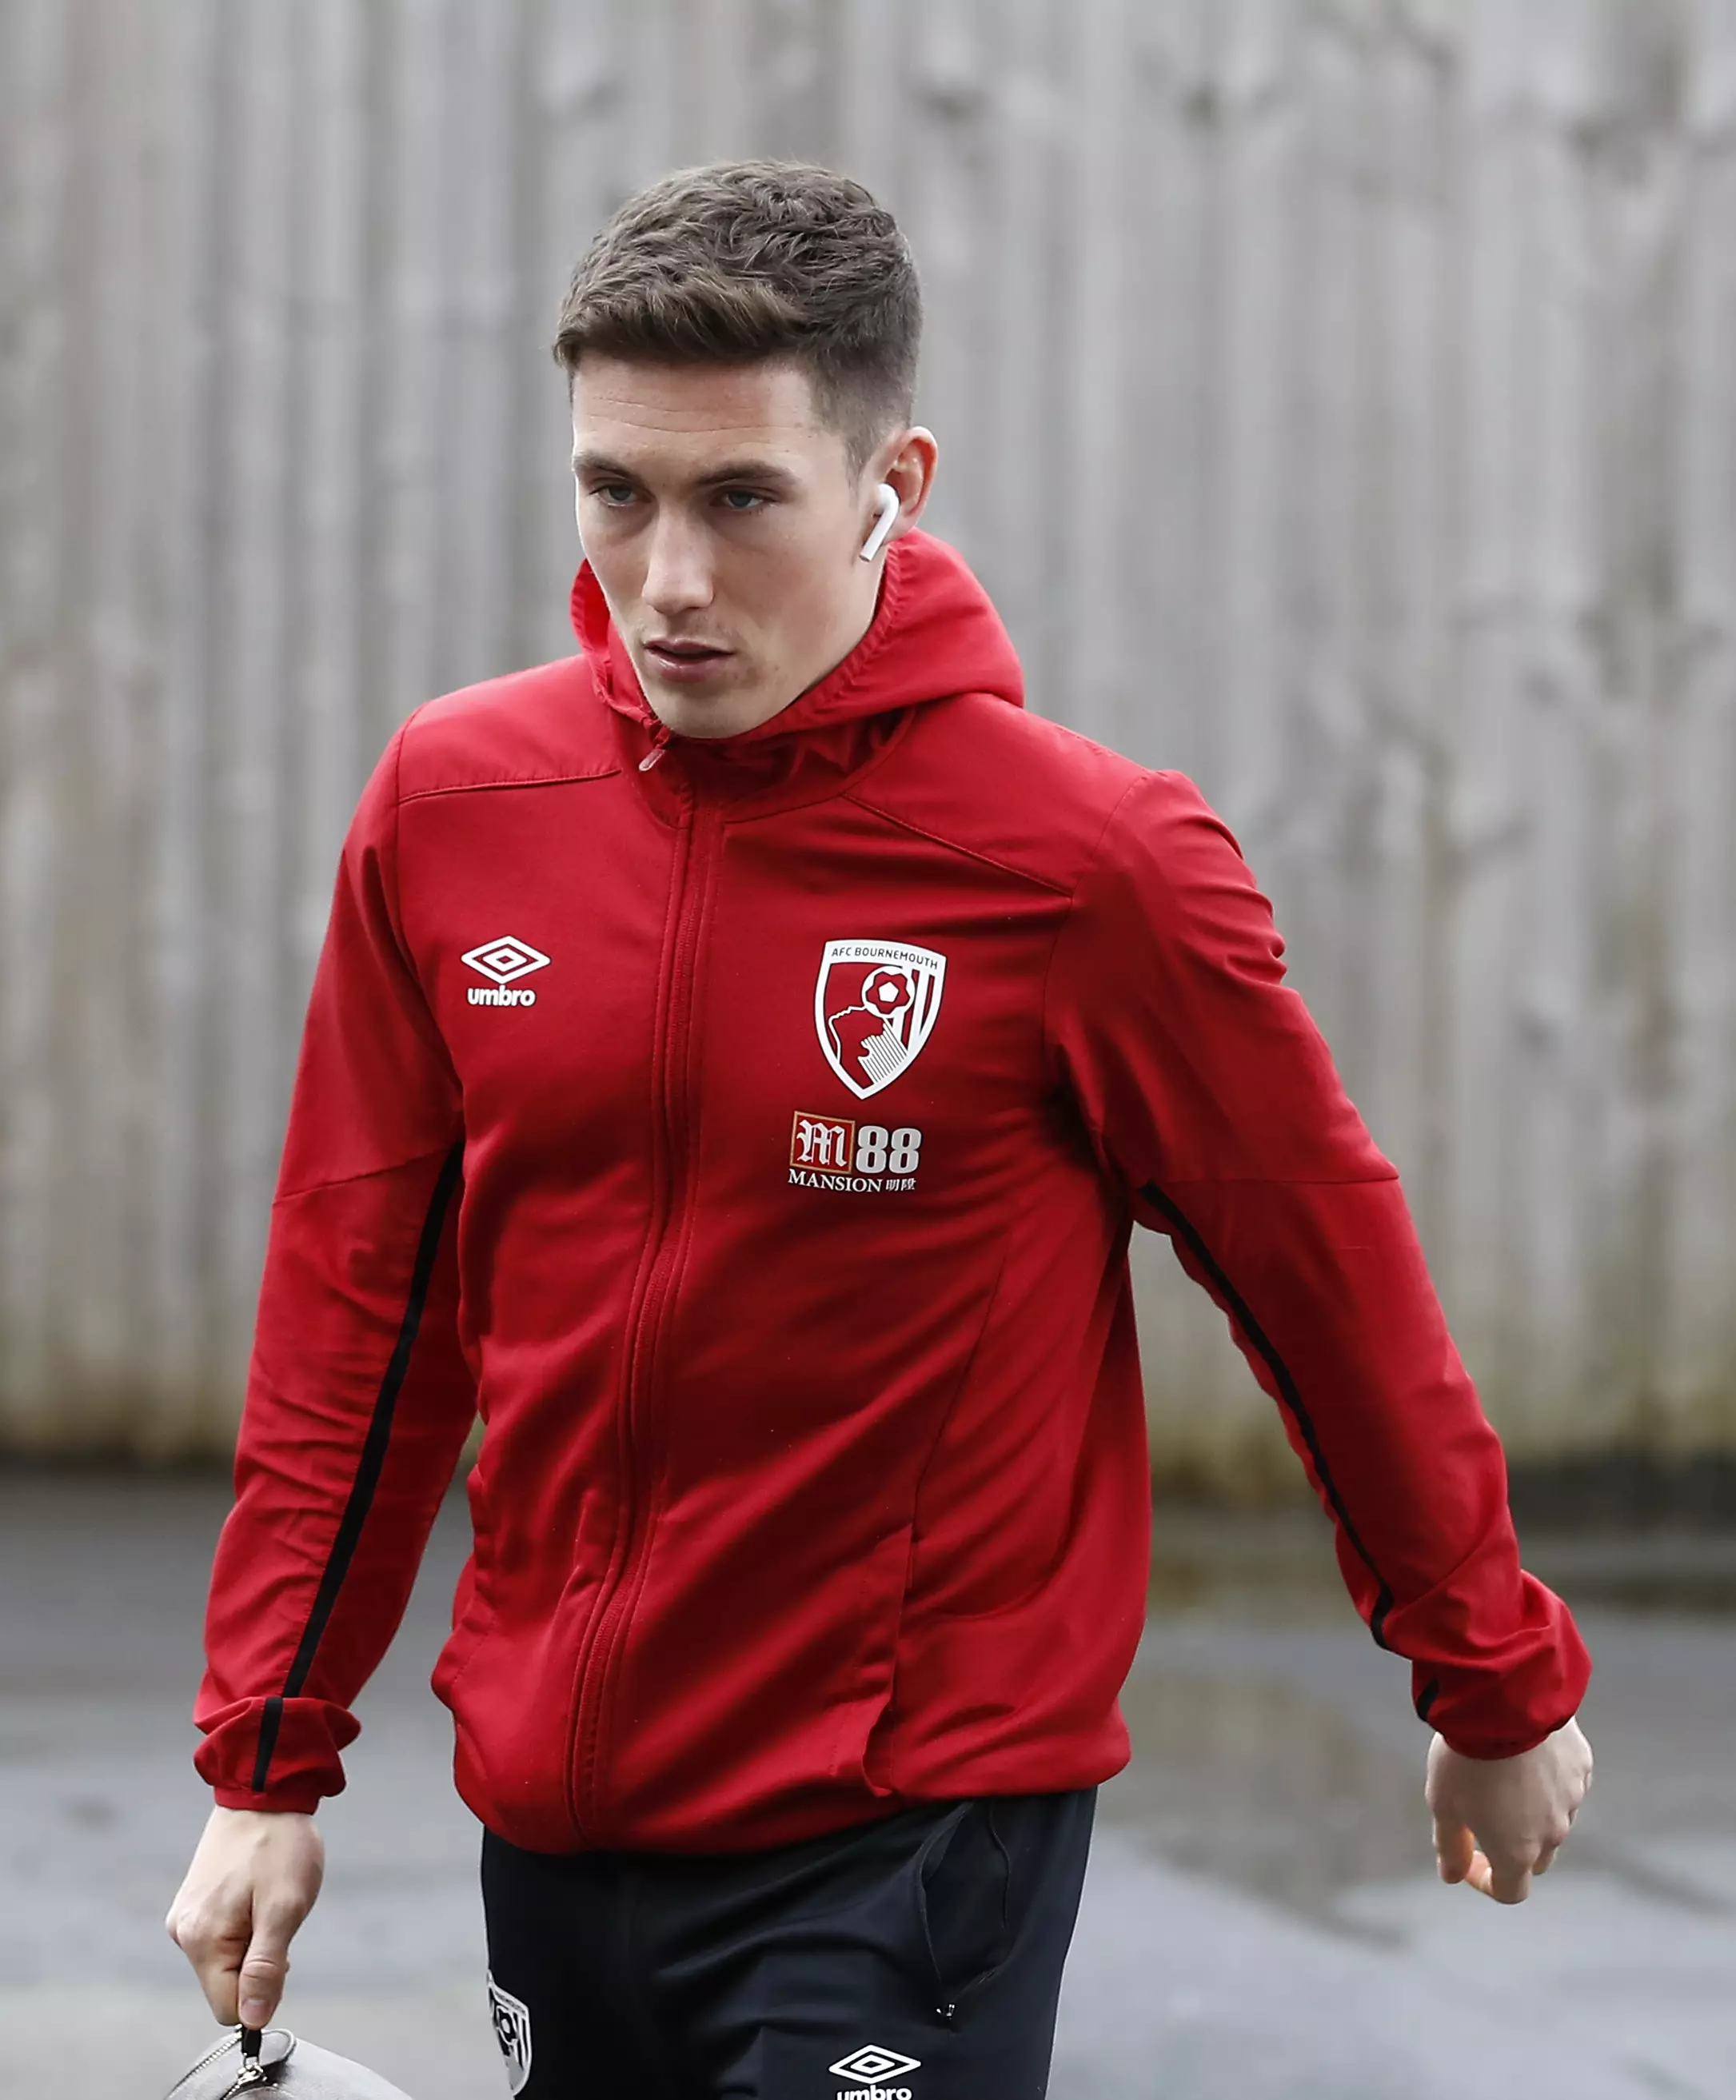 Harry Wilson's return to Liverpool could spell disaster for Bournemouth. (Image